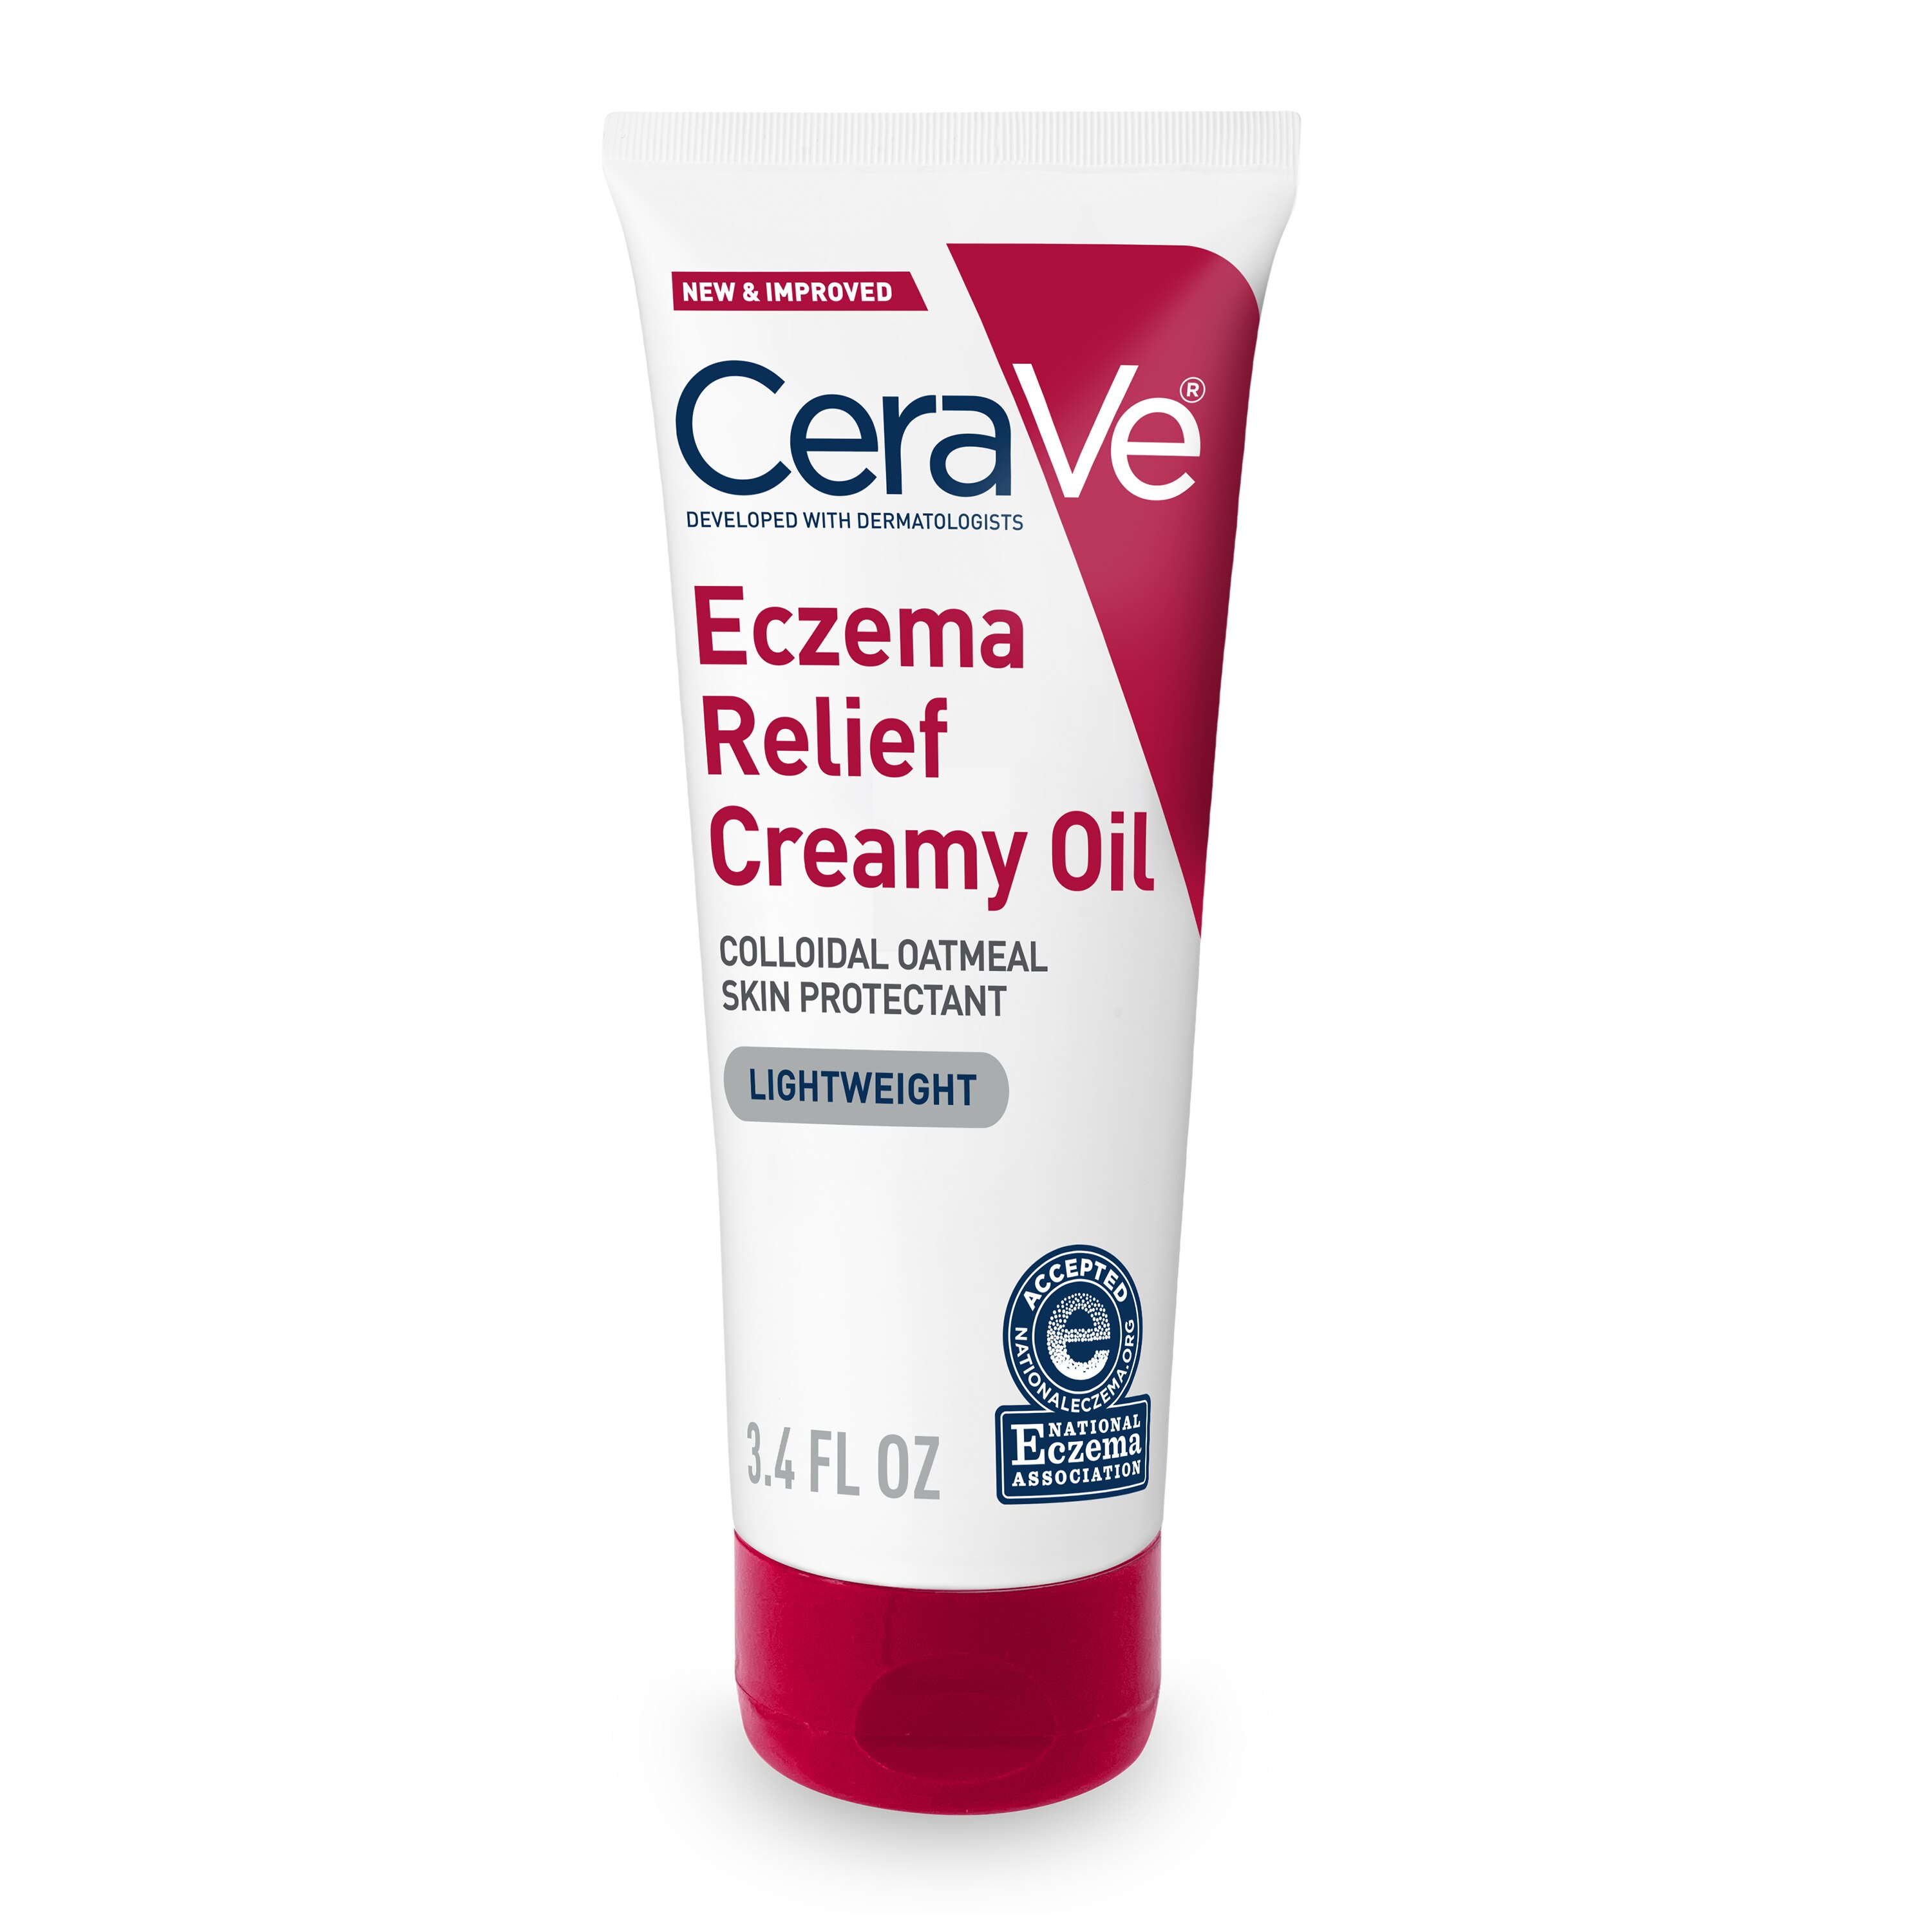 Cerave Eczema Relief Creamy Oil, Lightweight Body Moisturizing Lotion with Colloidal Oatmeal